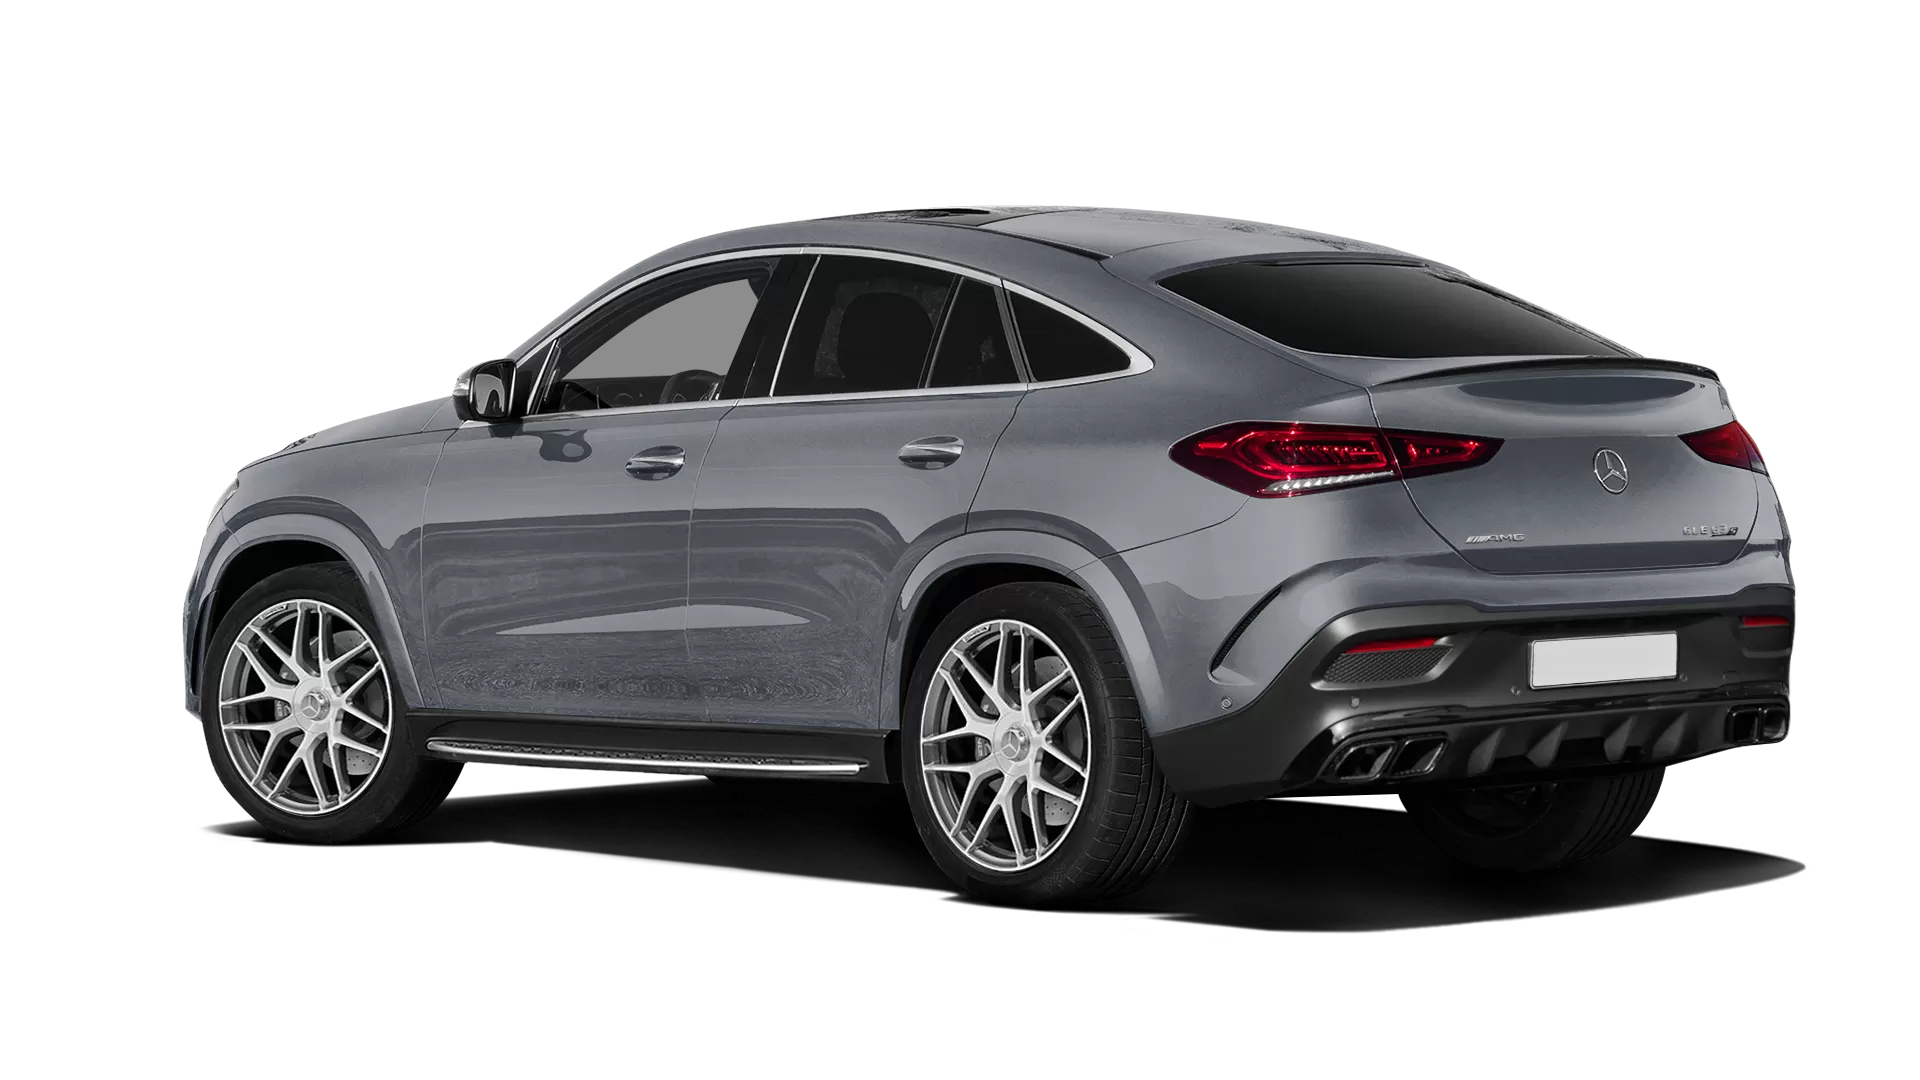 Mercedes GLE Coupe AMG 63 C167 stock rear view in Selenite Grey color